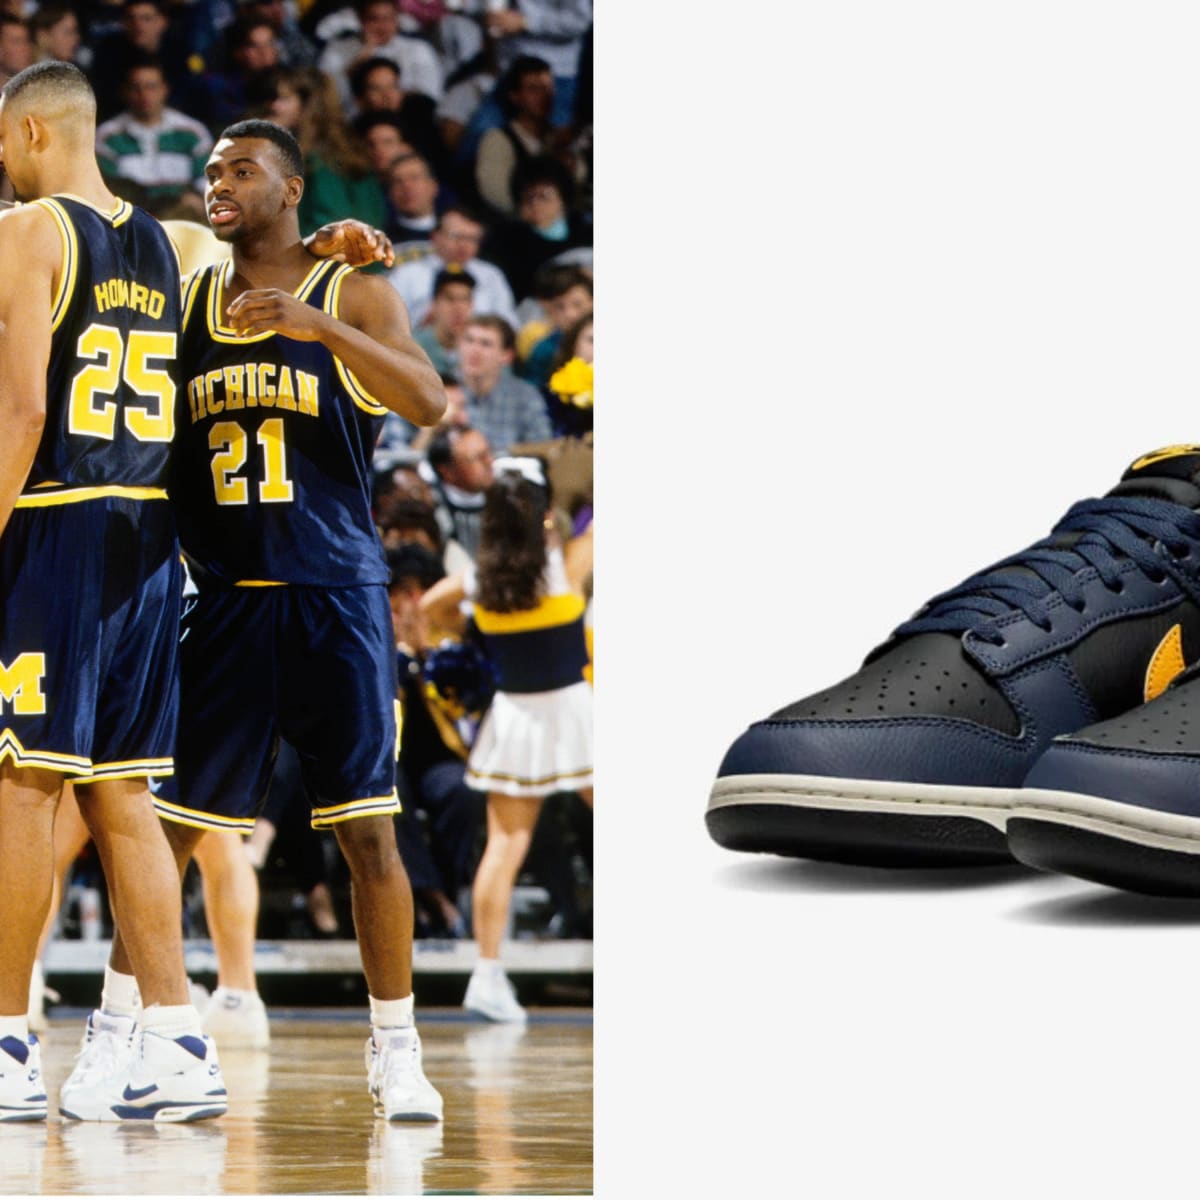 The Nike Dunk Low Vintage 'Michigan' Releases This Week - Sports ...